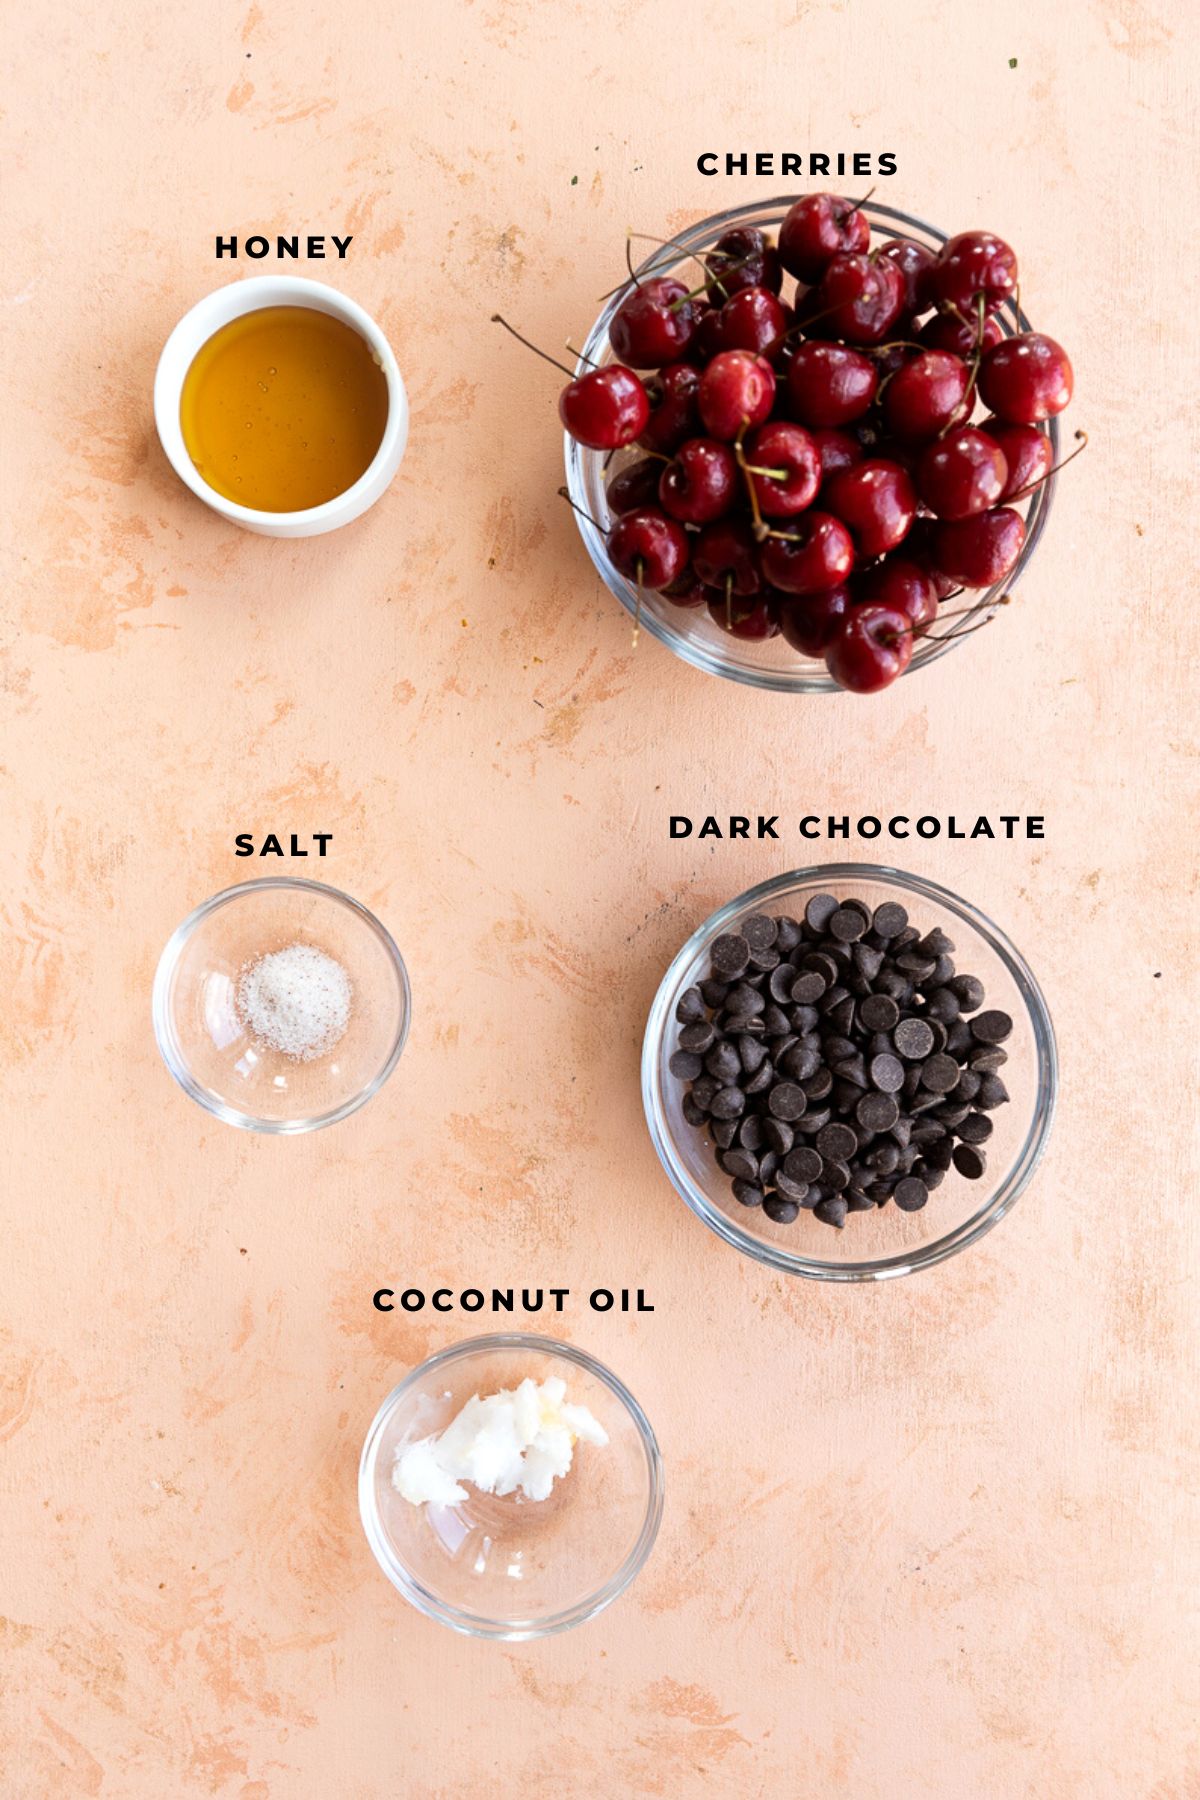 Ingredients measured out for dark chocolate cherry cups.